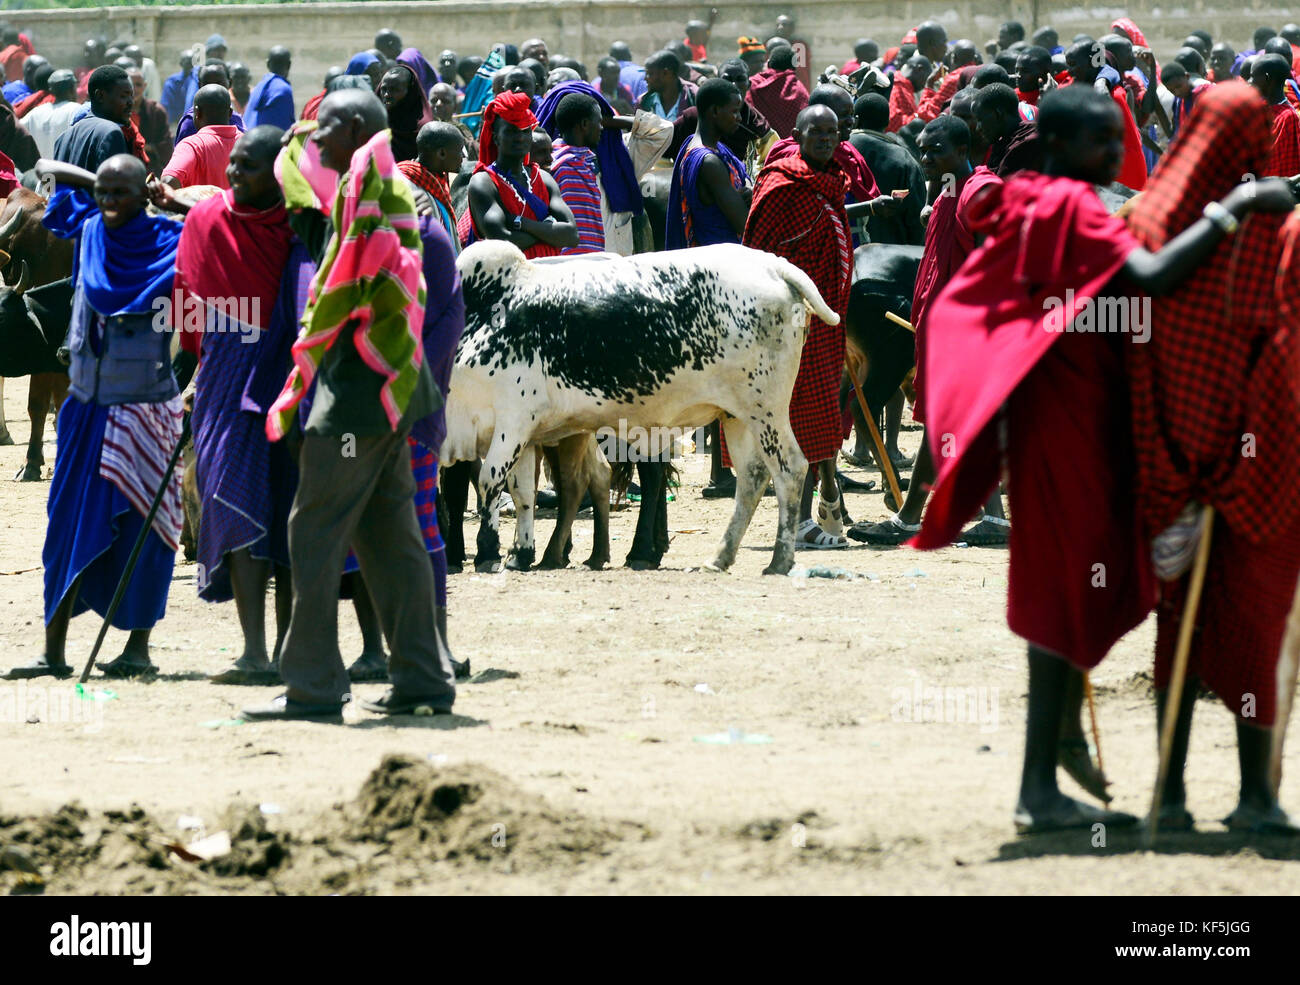 Maasai tribesmen in a colorful cattle and fresh produce market in Northern Tanzania. Stock Photo